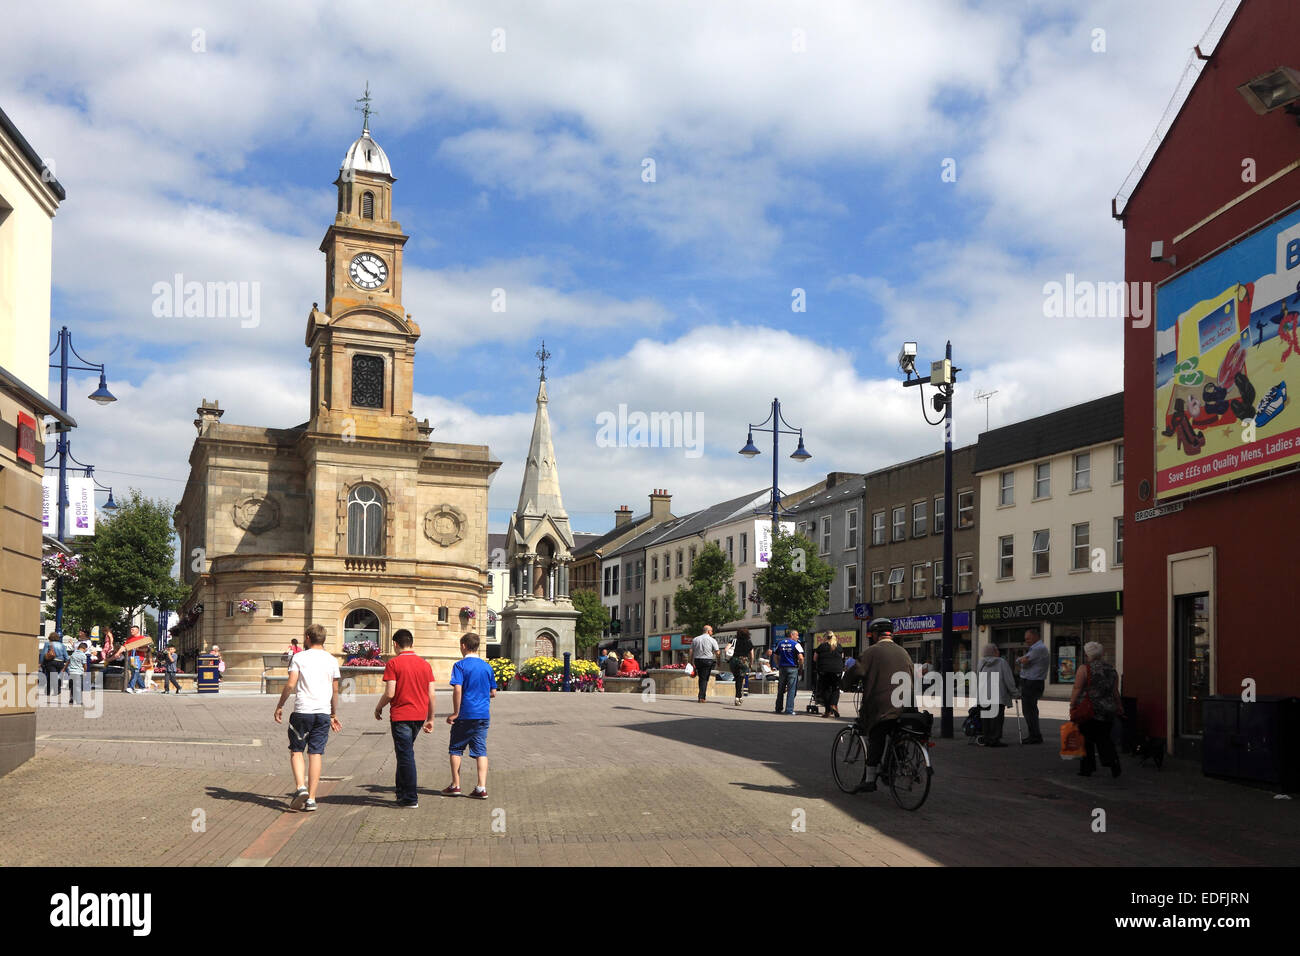 The Town Hall in The Diamond, Coleraine town centre, Northern Ireland Stock Photo